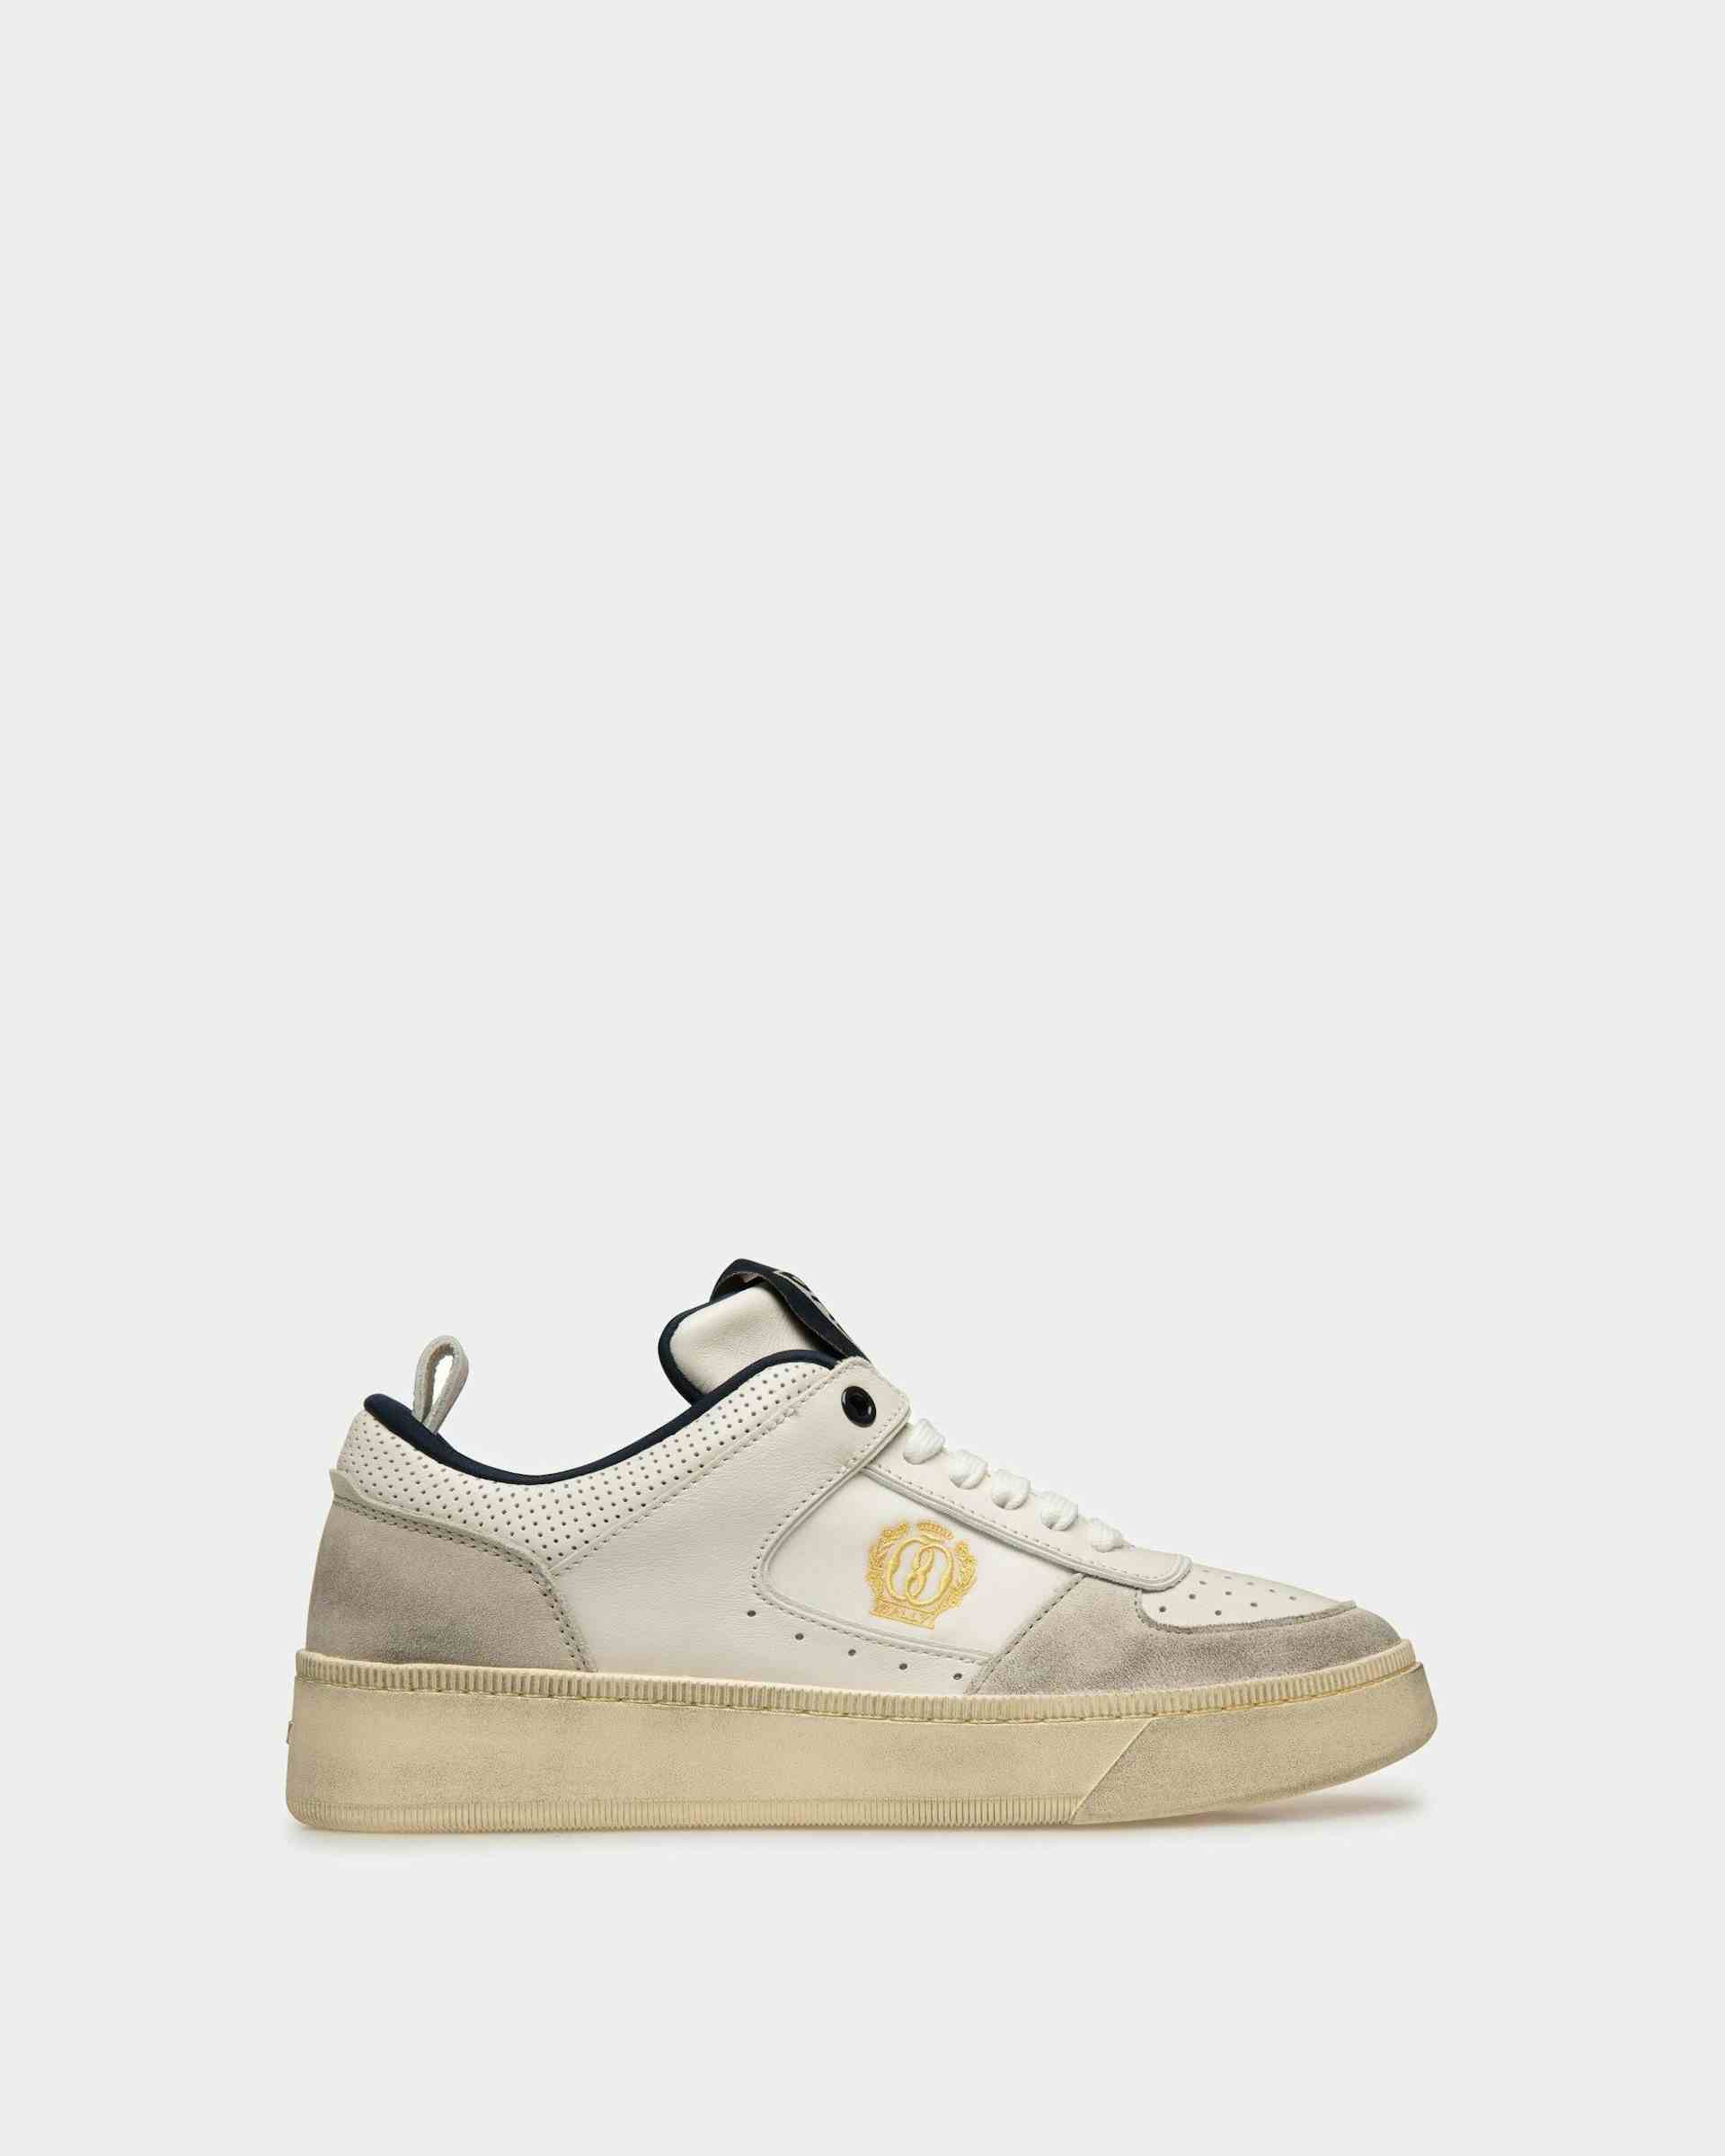 Raise Sneakers In Dusty White And Midnight Leather - Women's - Bally